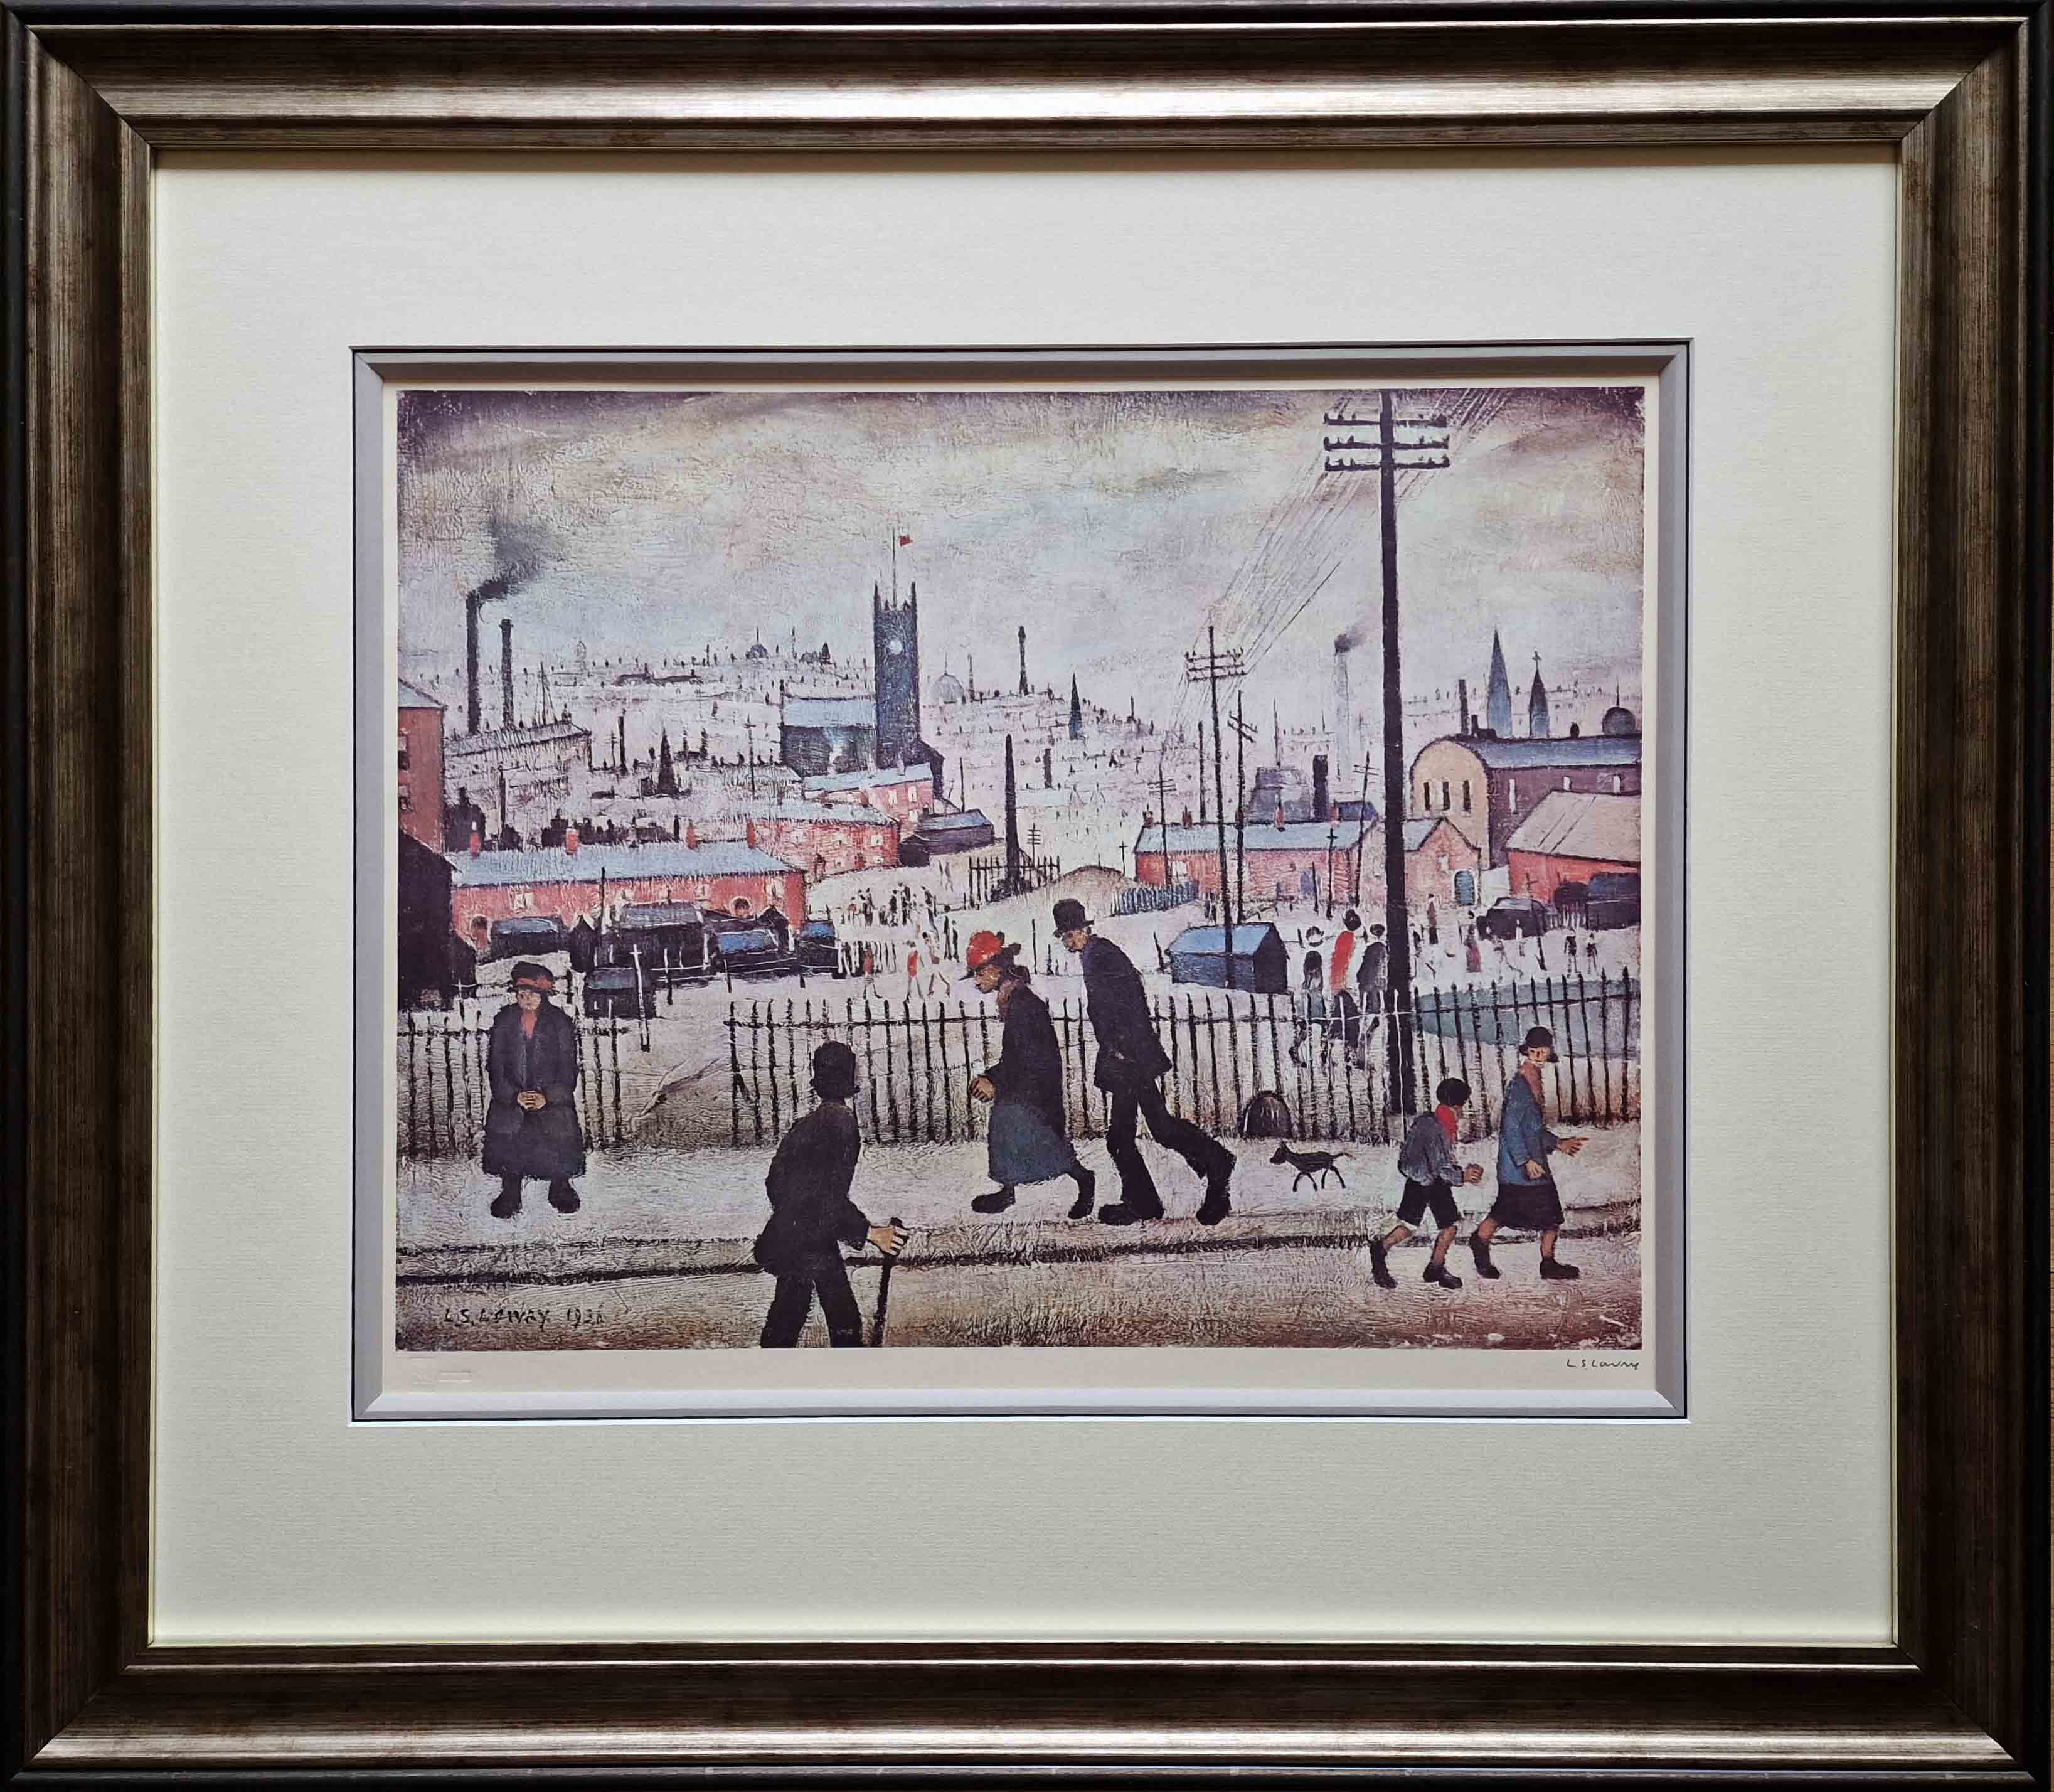 lowry view of a town french bound framed